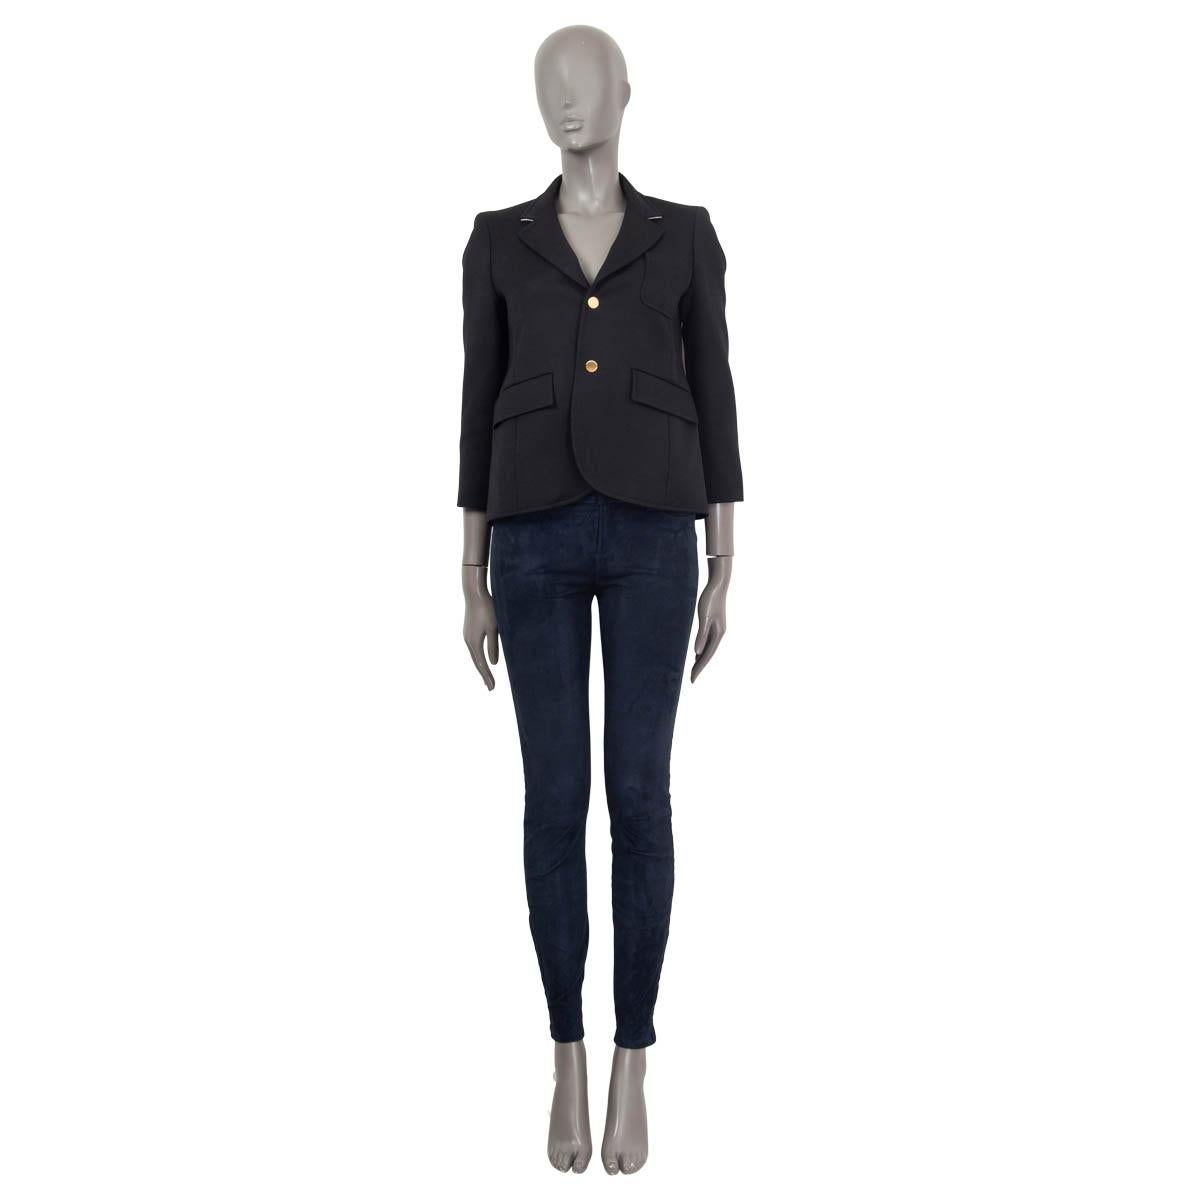 100% authentic Balenciaga cropped blazer jacket in black wool (100%). Features gold buttoned cuffs and three pockets on the front. The collar is lined in off-white. Opens with two golden buttons on the front. Lined in black cupro (100%). Has been